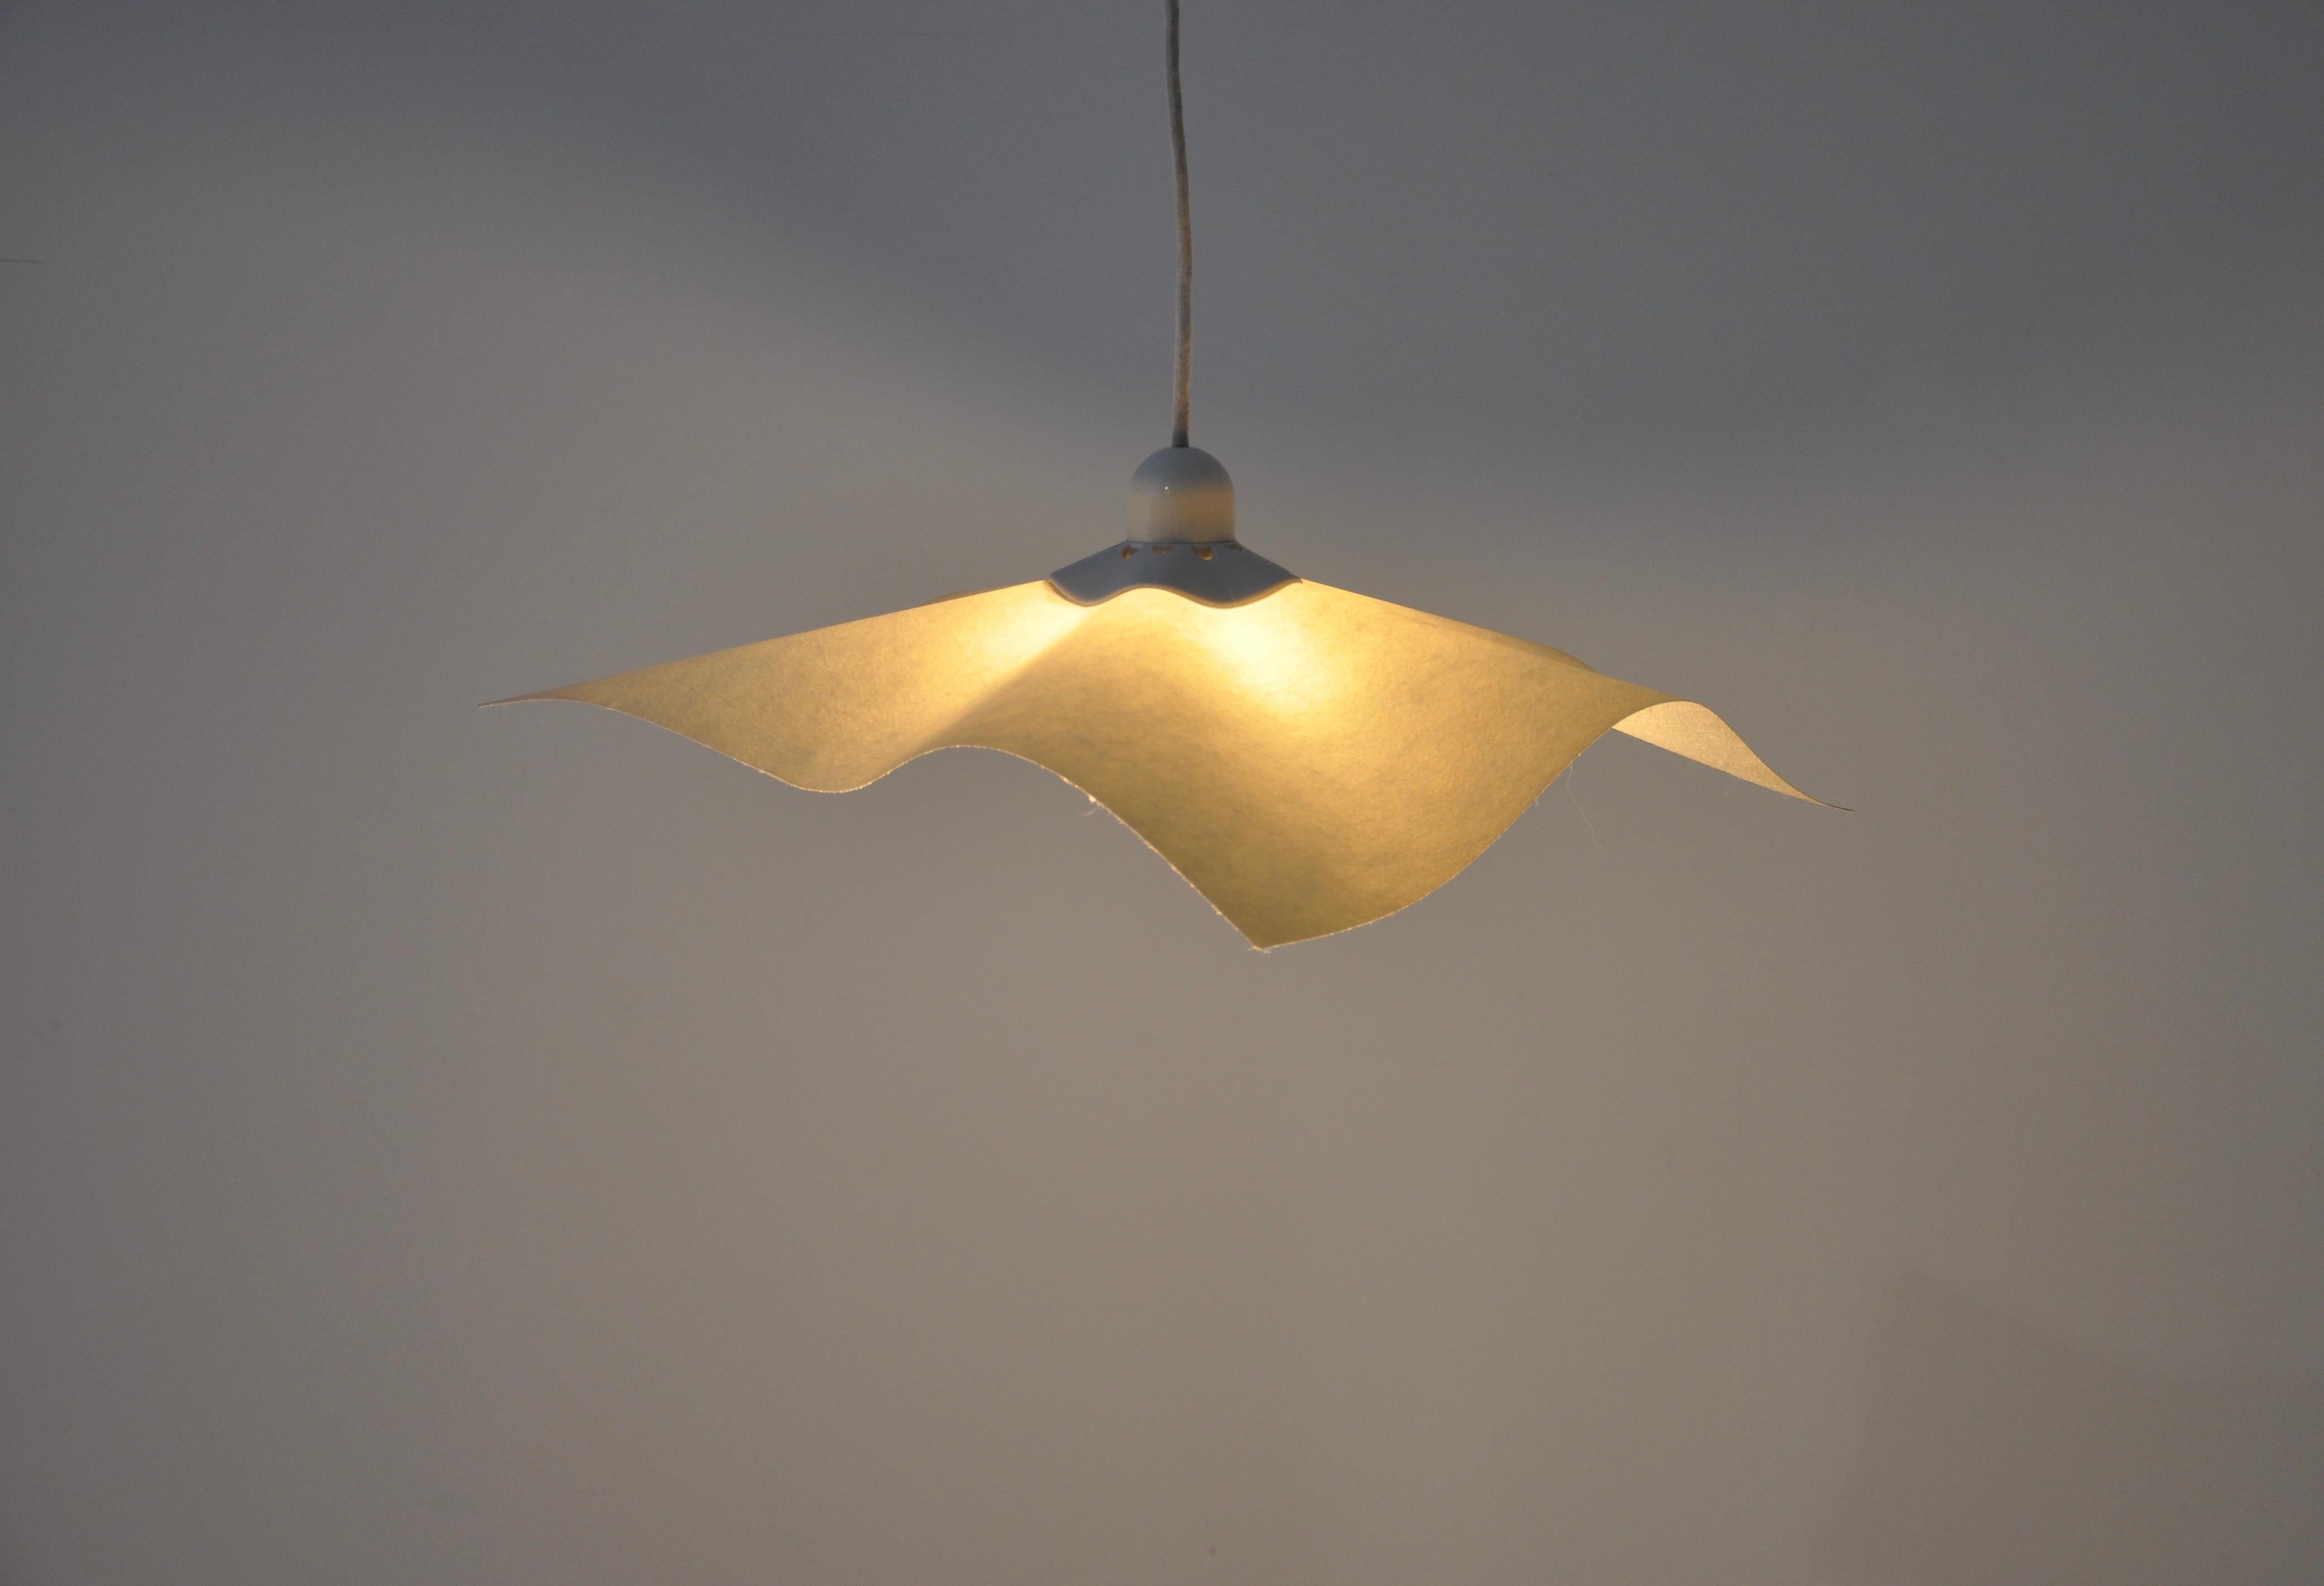 Paper and plastic hanging lamp by Mario Bellini, model: Area 50. Maximum height with cable: 225 cm. Wear due to time and age